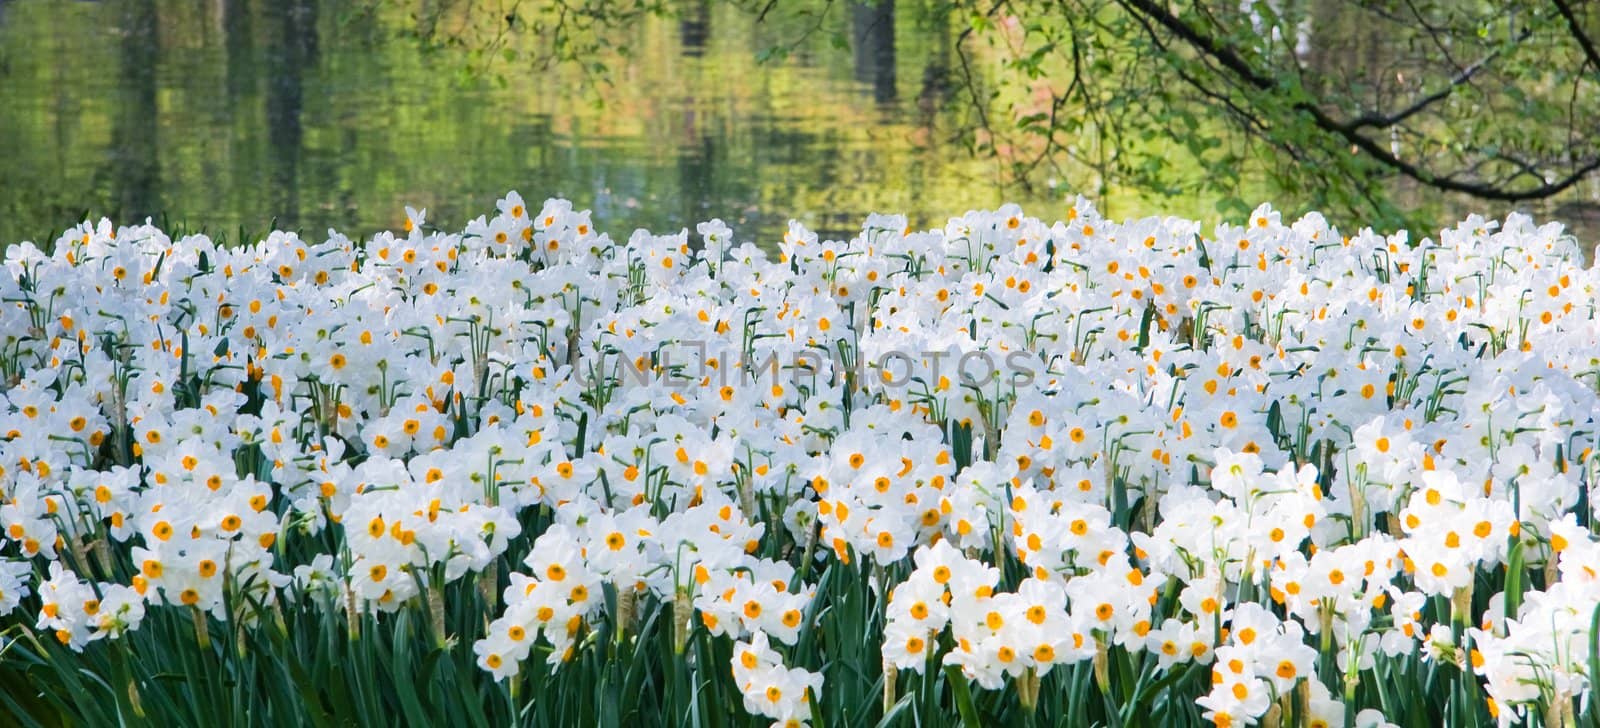 Lots of small white daffodils by Colette